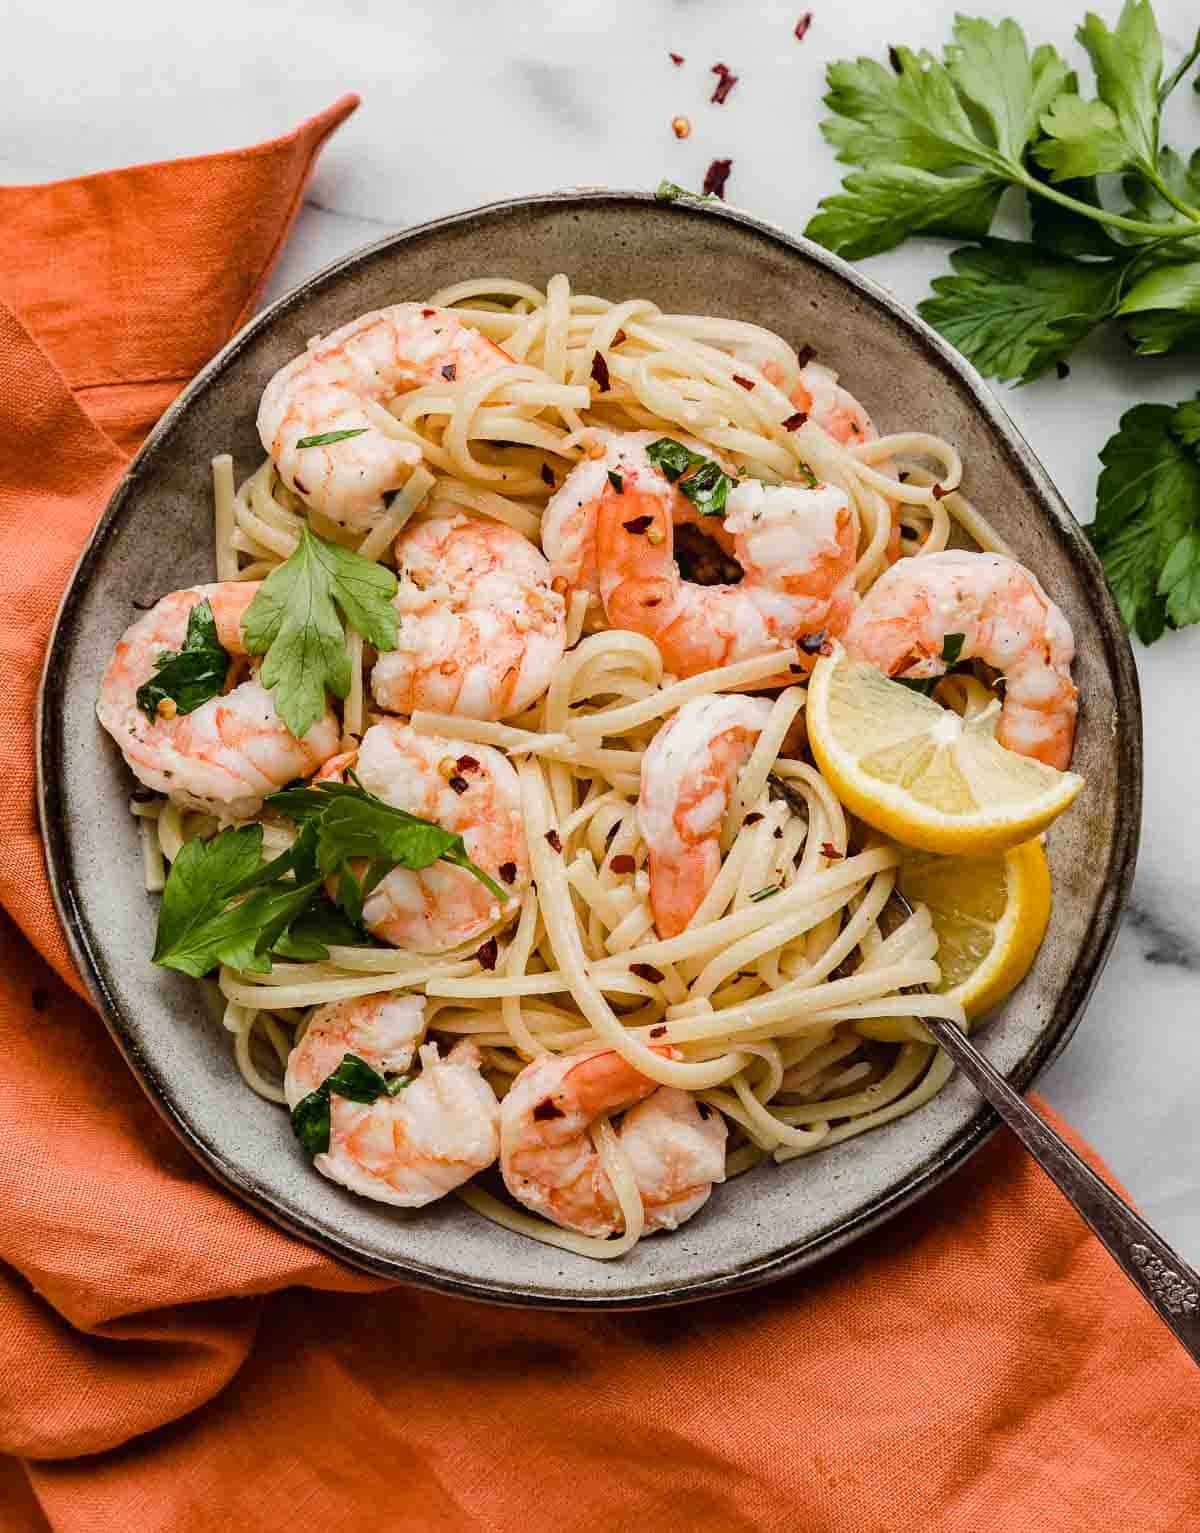 A gray pasta bowl filled with linguine noodles topped with red pepper flakes and cooked pink shrimp.